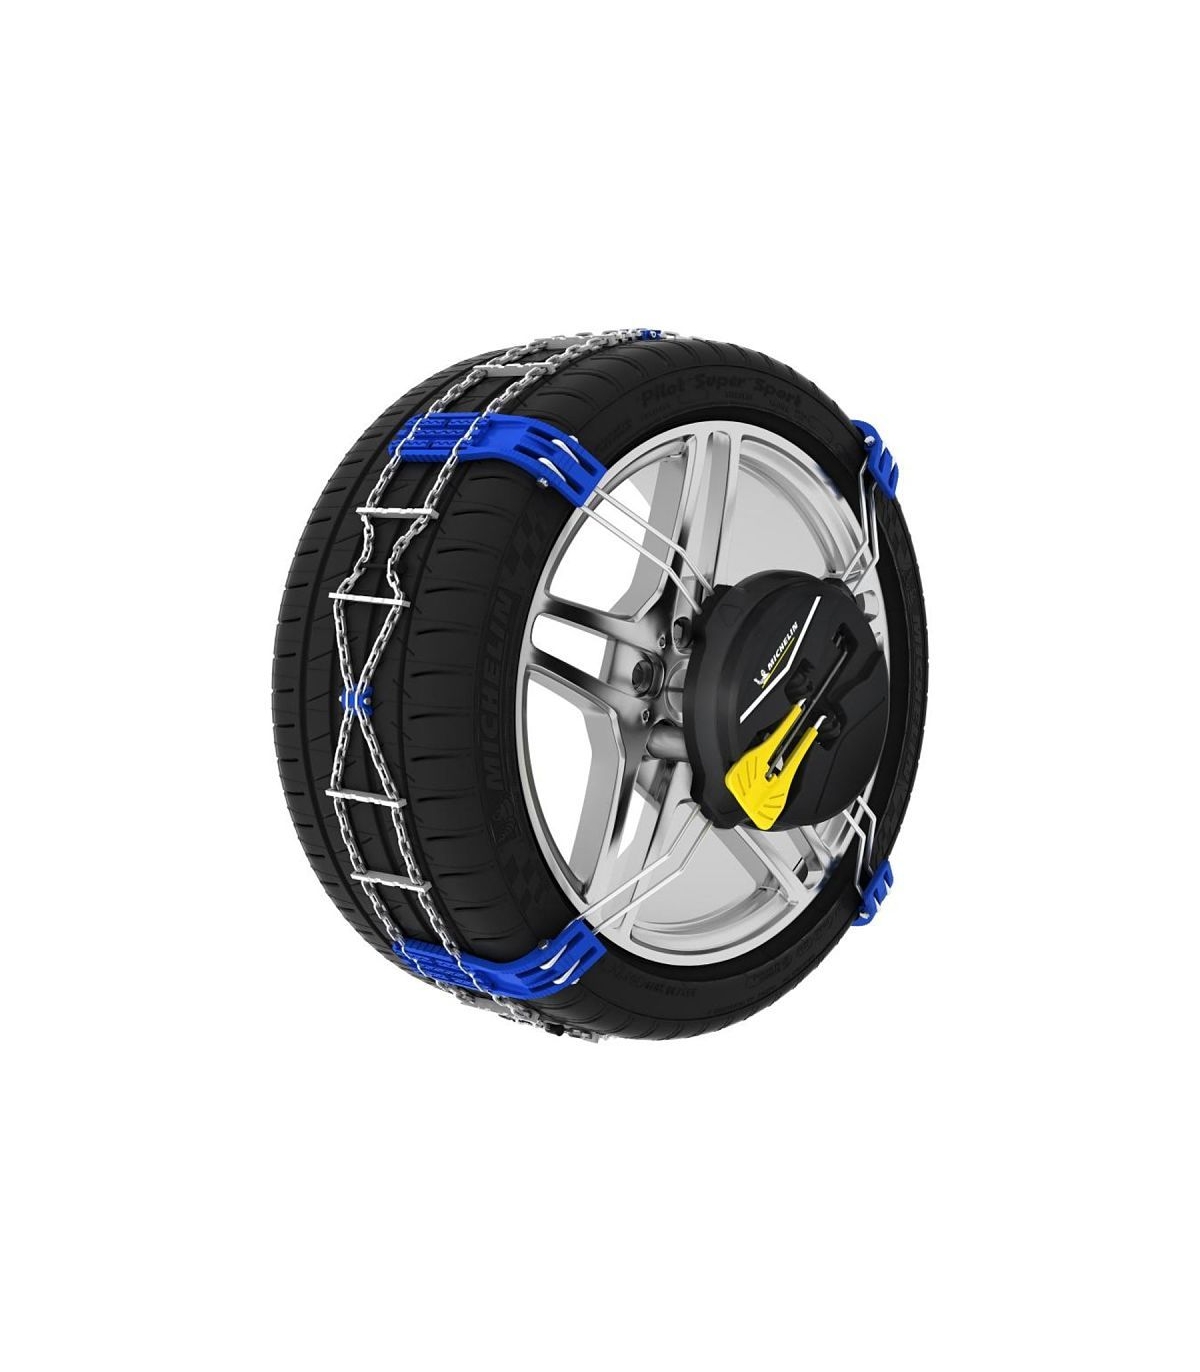 Chaines neige frontale MICHELIN FASTGRIP vehicule non chainable 225/50R18  205/55R18 225/45R19